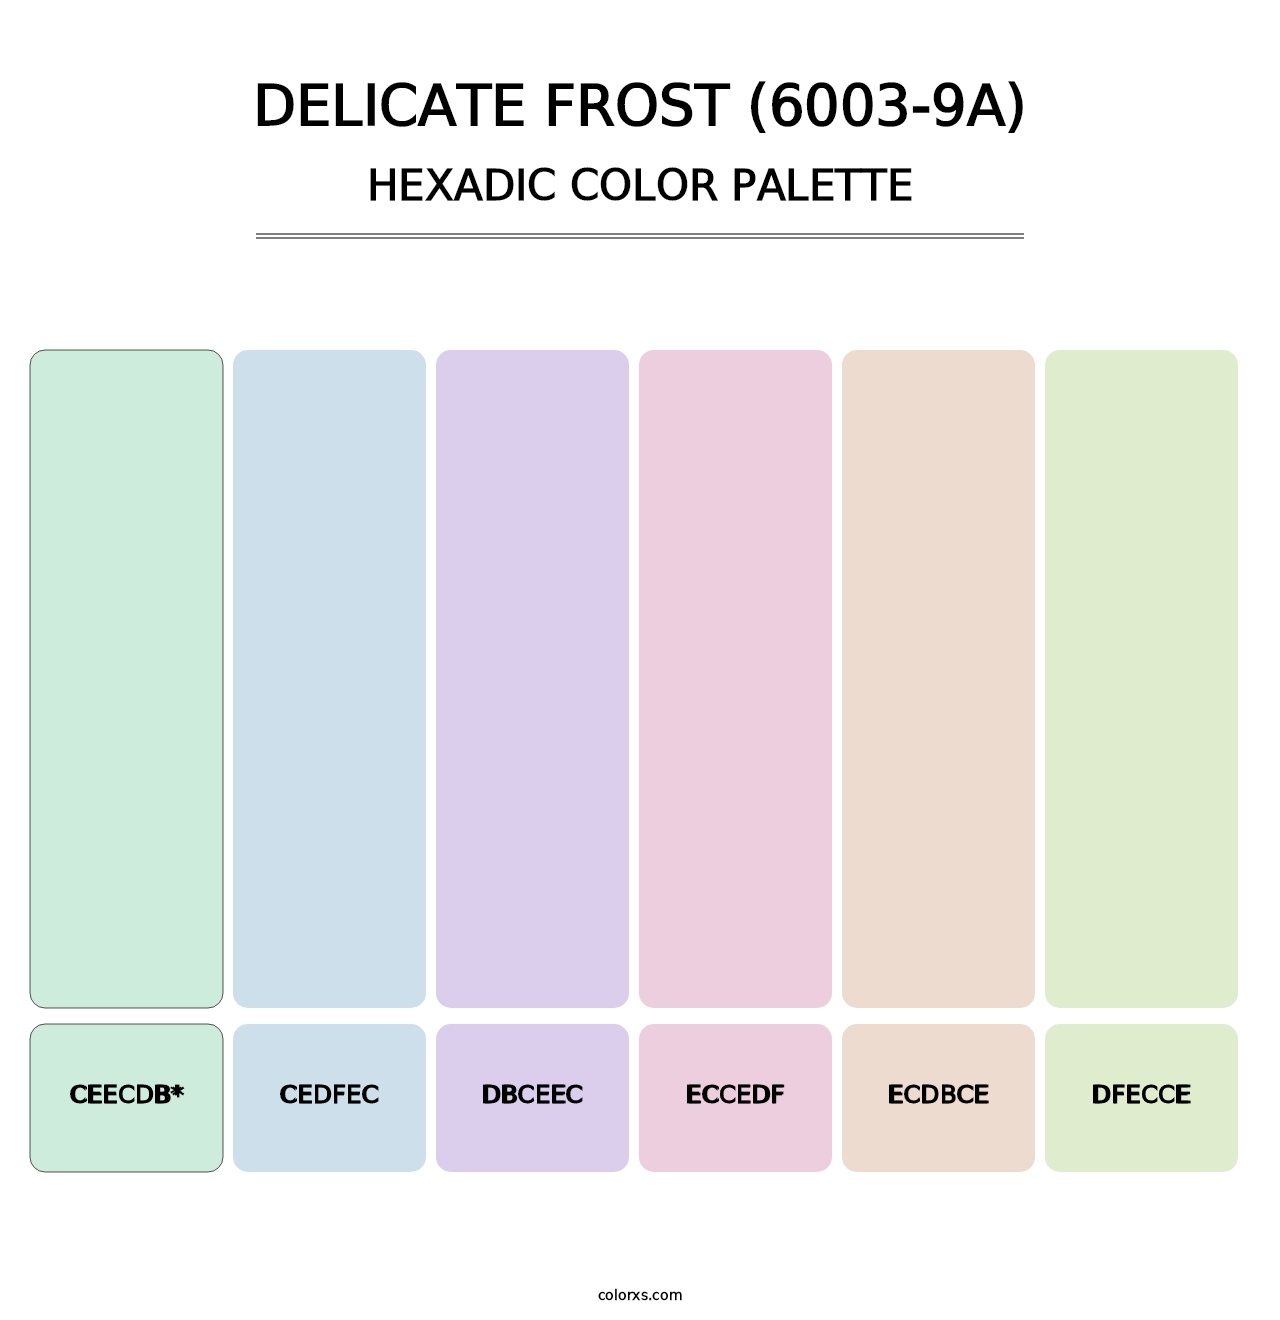 Delicate Frost (6003-9A) - Hexadic Color Palette